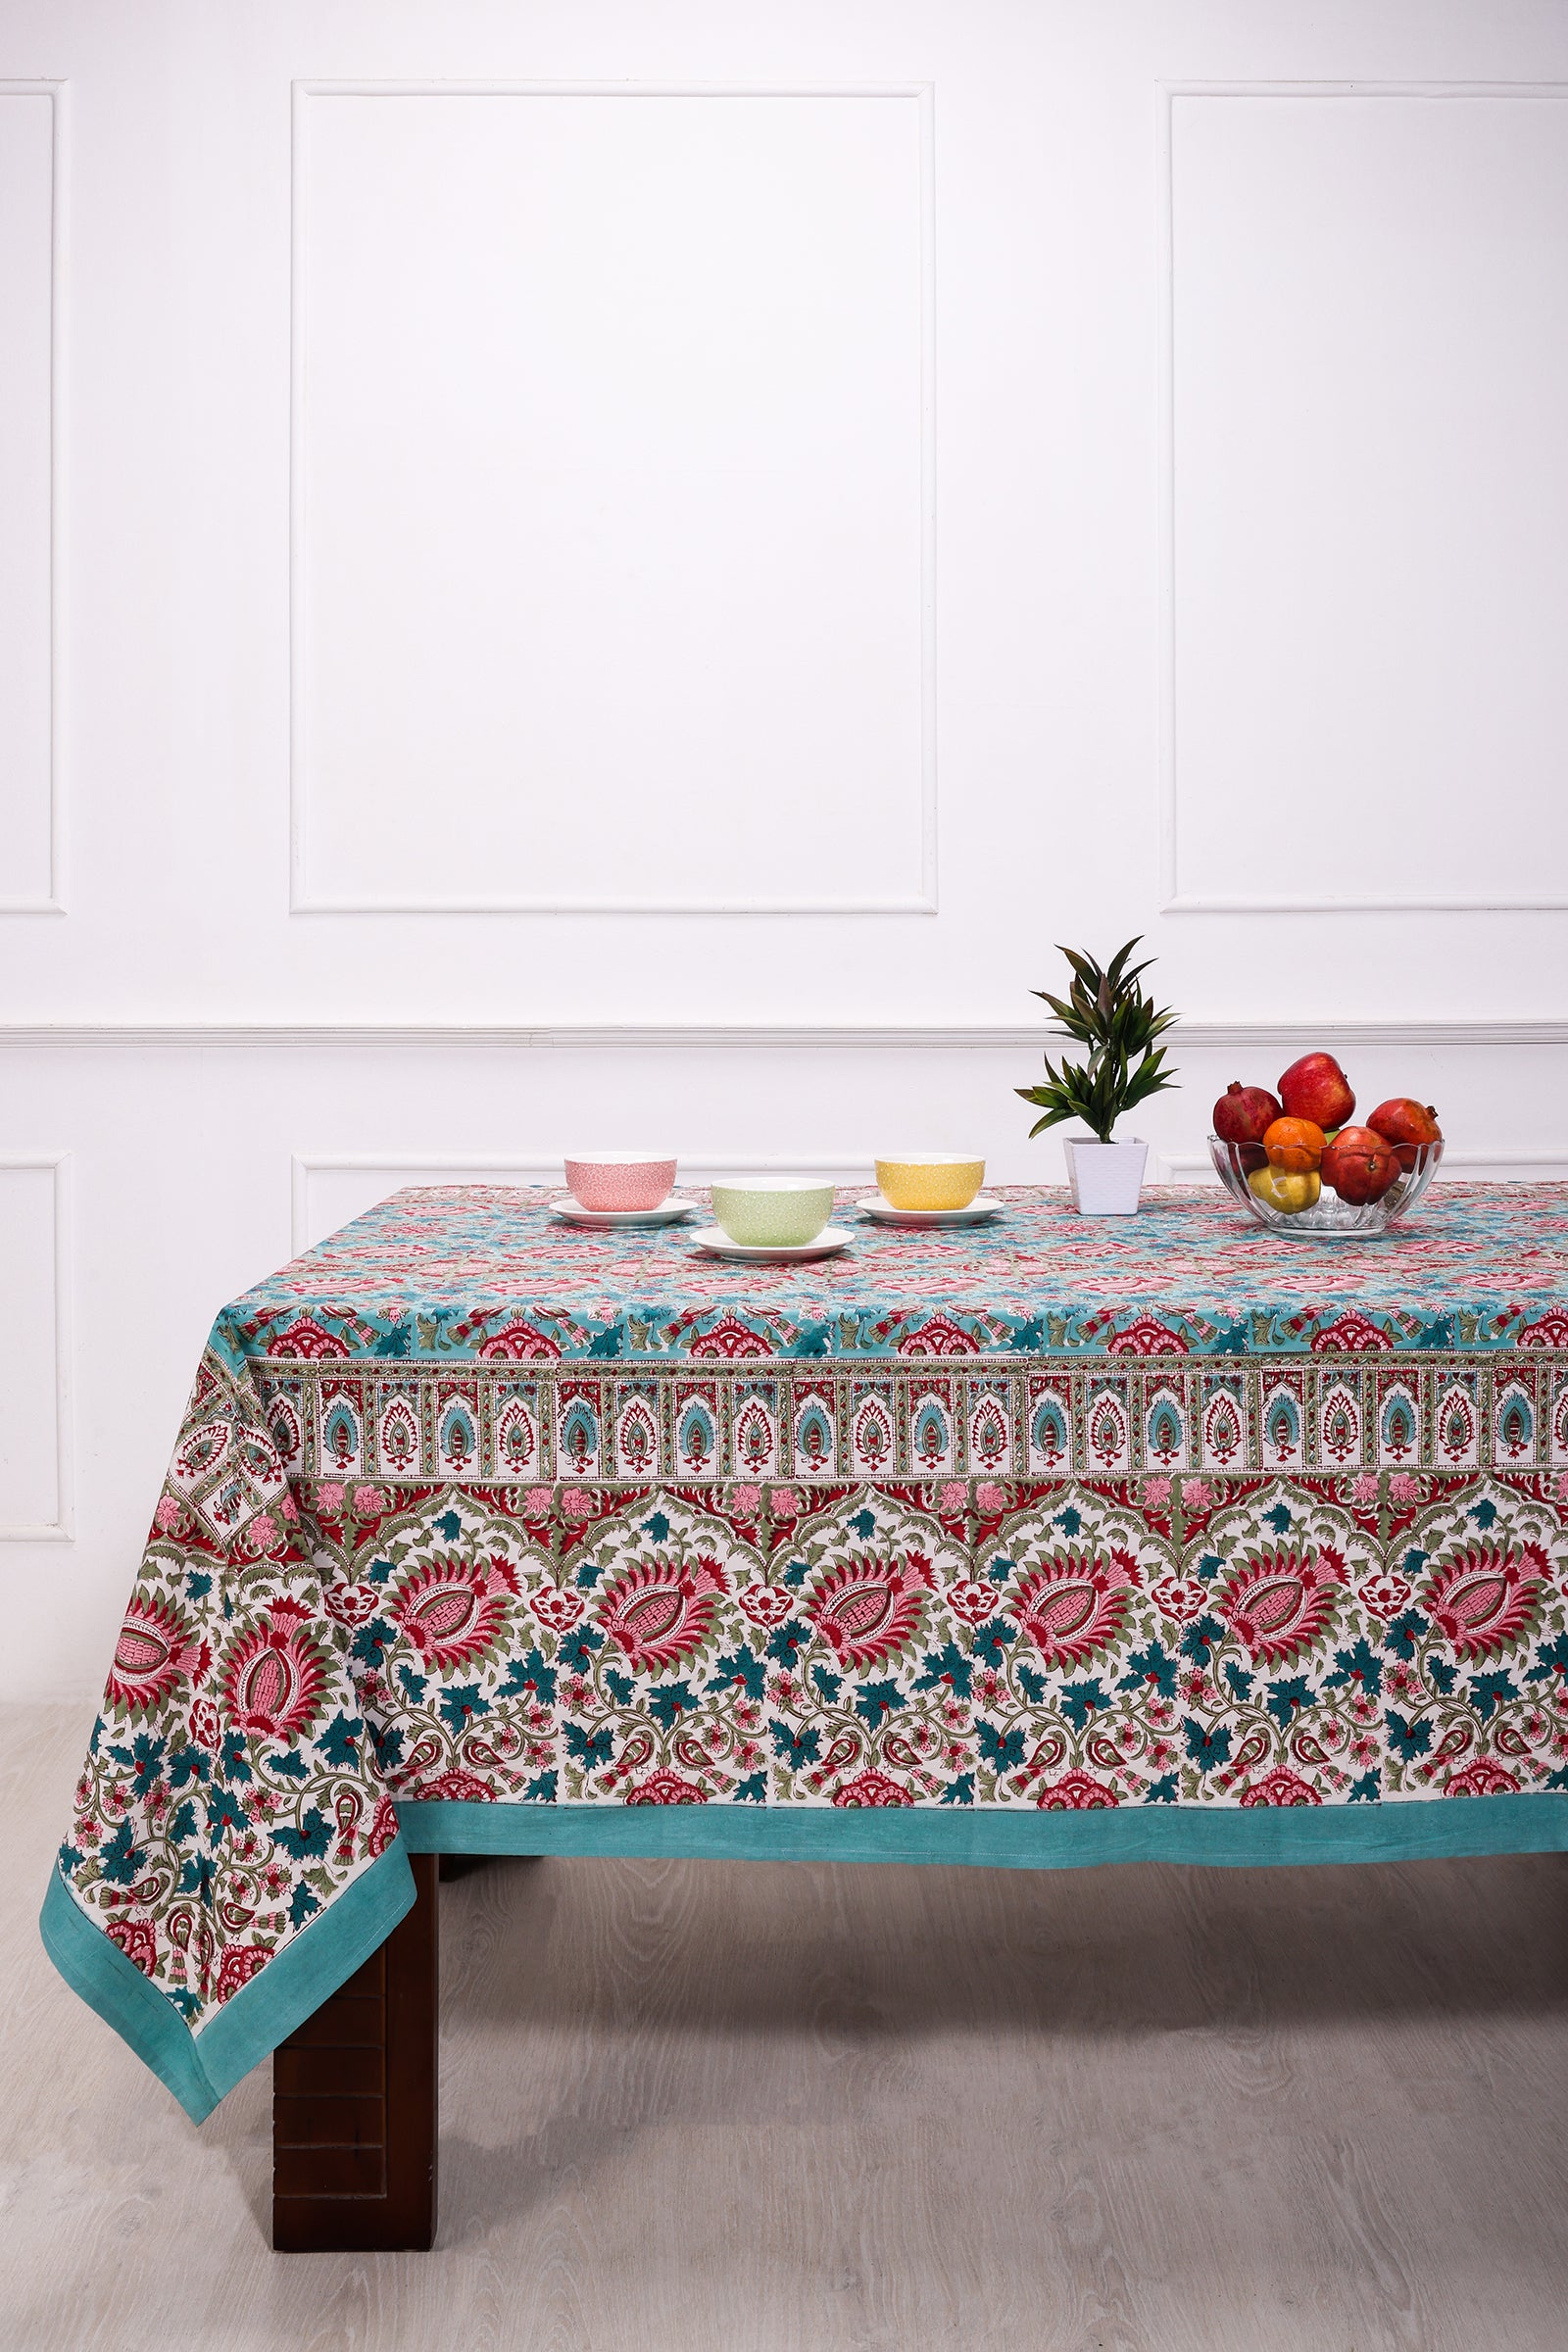 Charmine Floral Bloom Printed Turquoise Cotton Table Cover - shahenazindia